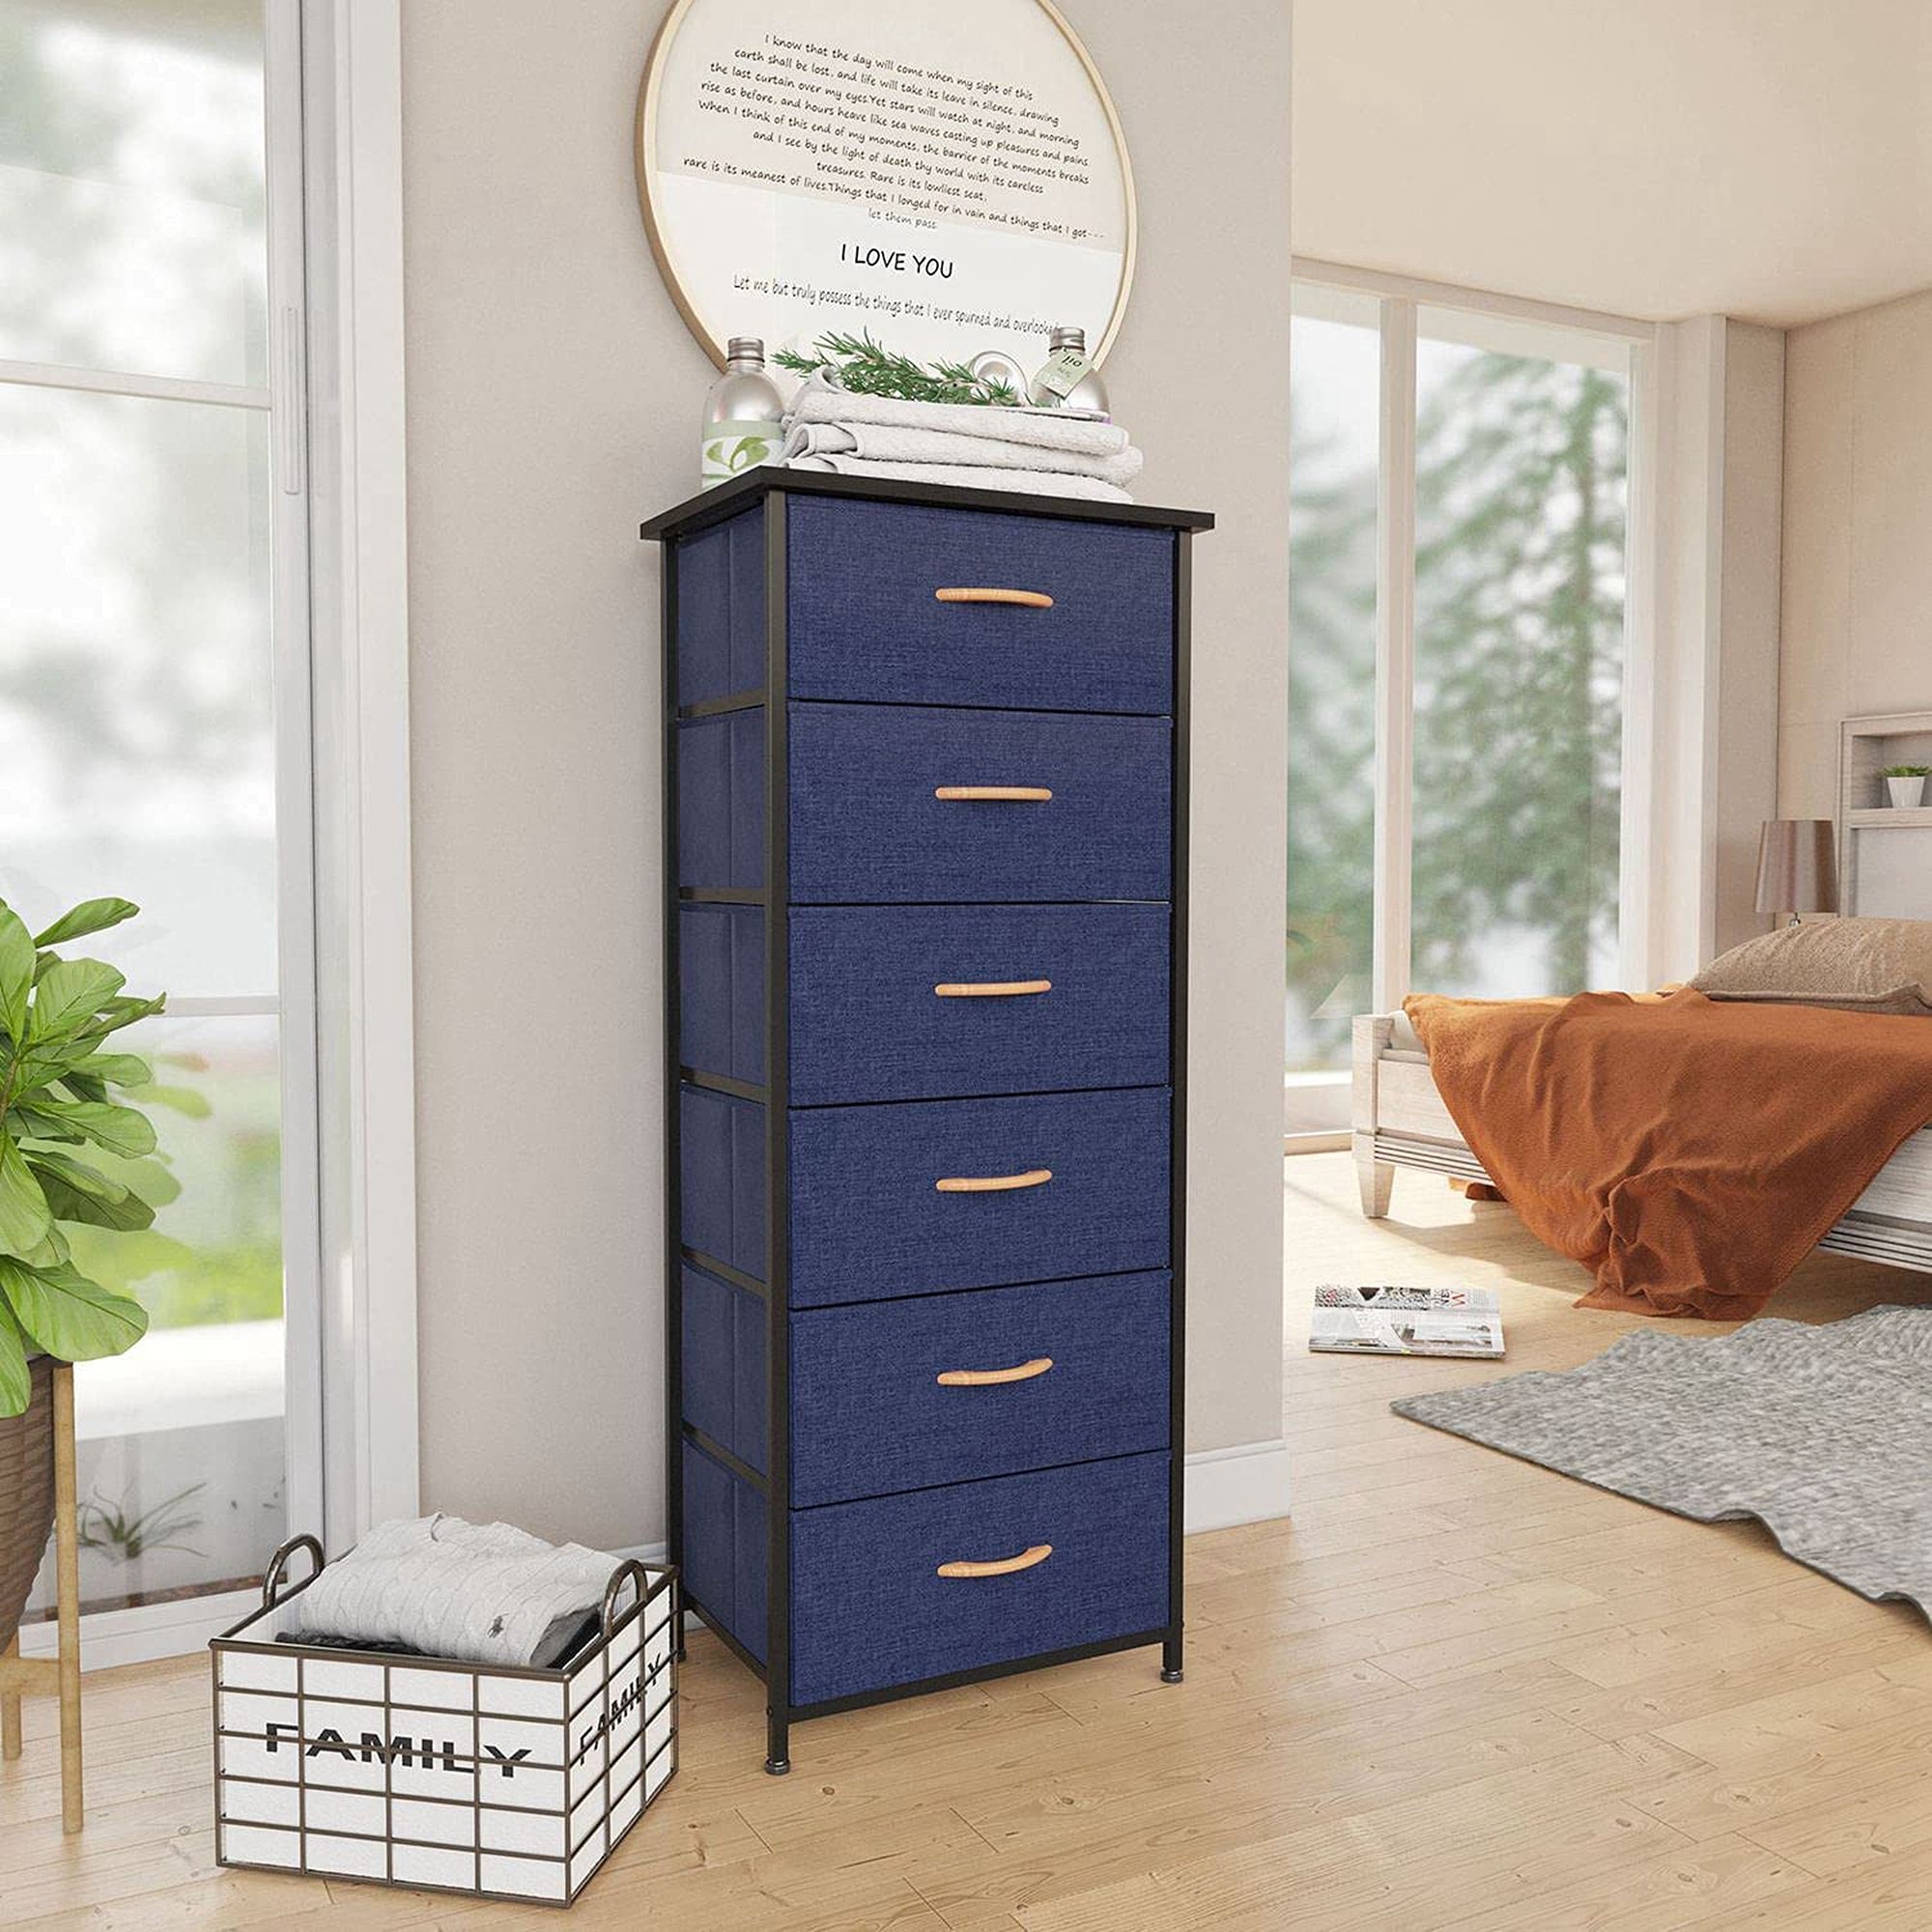 https://ak1.ostkcdn.com/images/products/is/images/direct/0301376ba9ce94e985587a3f44b34a5cc6e03c52/6-Drawers-Dresser%2C-Tall-Dresser-Vertical-Storage-Tower-with-Wooden-Handle-and-Wooden-Top.jpg